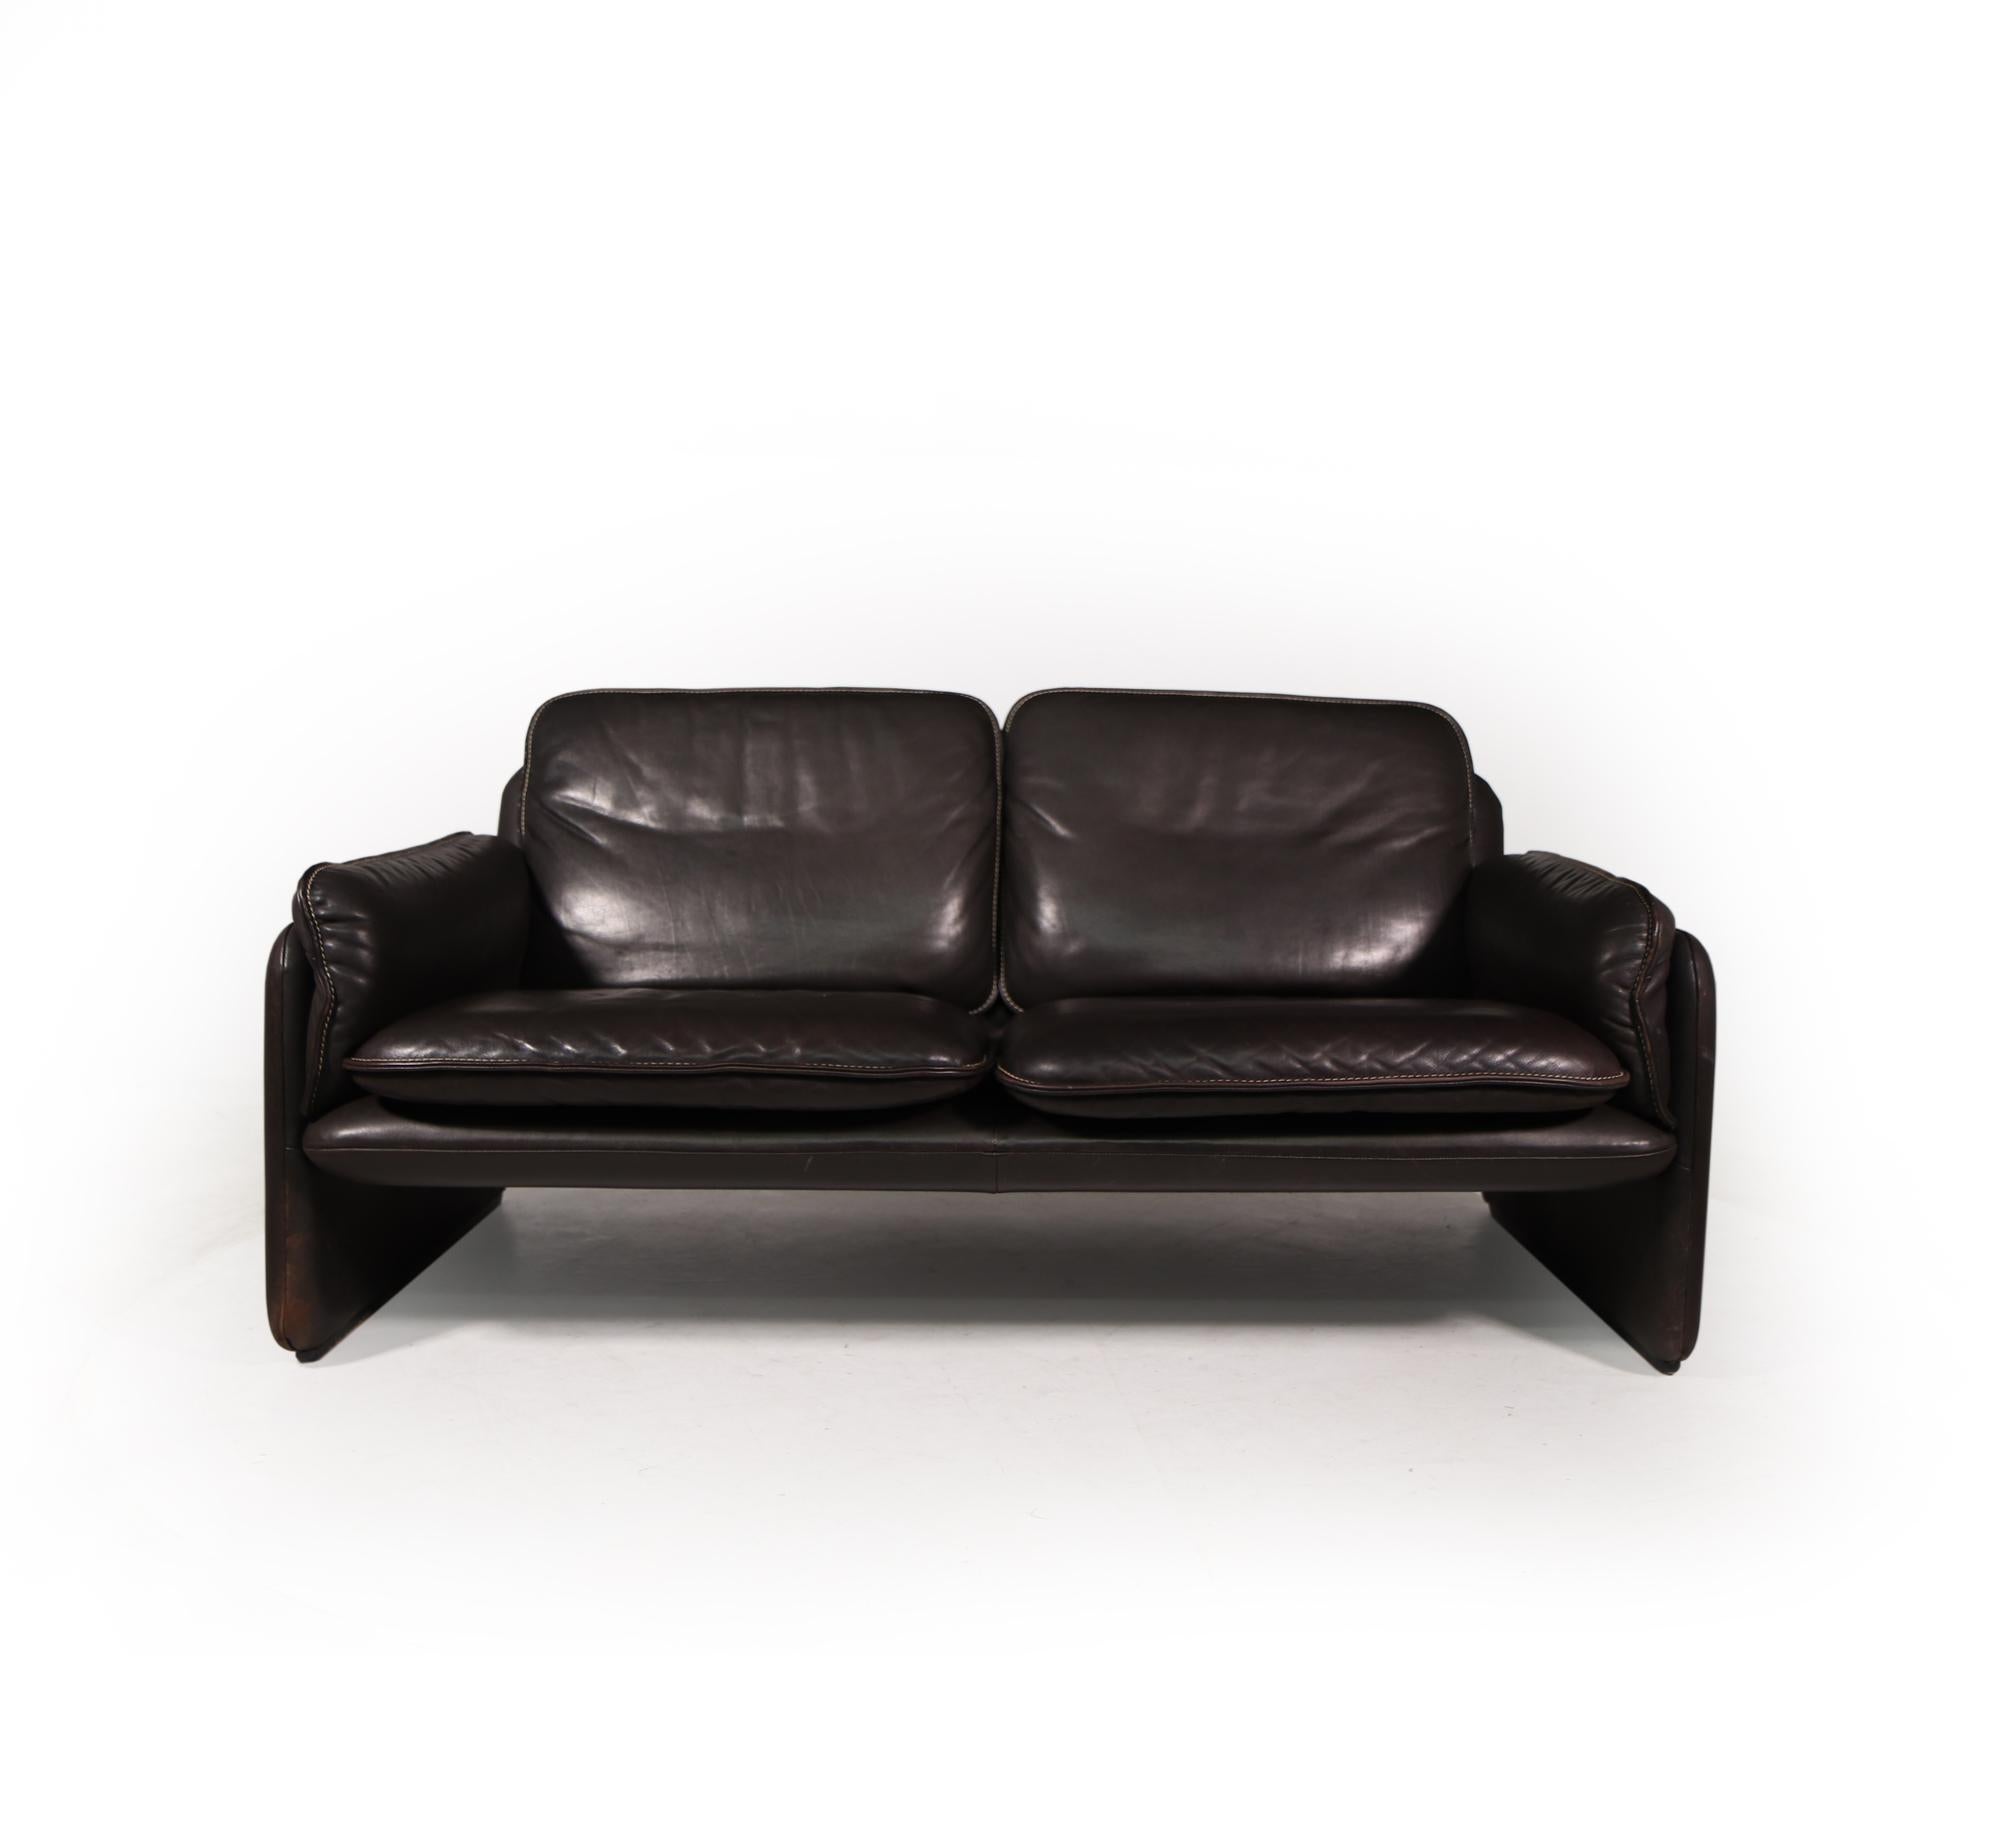 De Sede DS 61 High-quality leather two seat sofa. It is covered with quality thick dark brown leather upholstery with white stitching , and features a heavy wooden frame. original vintage condition throughout, with no rips tears or repairs to the